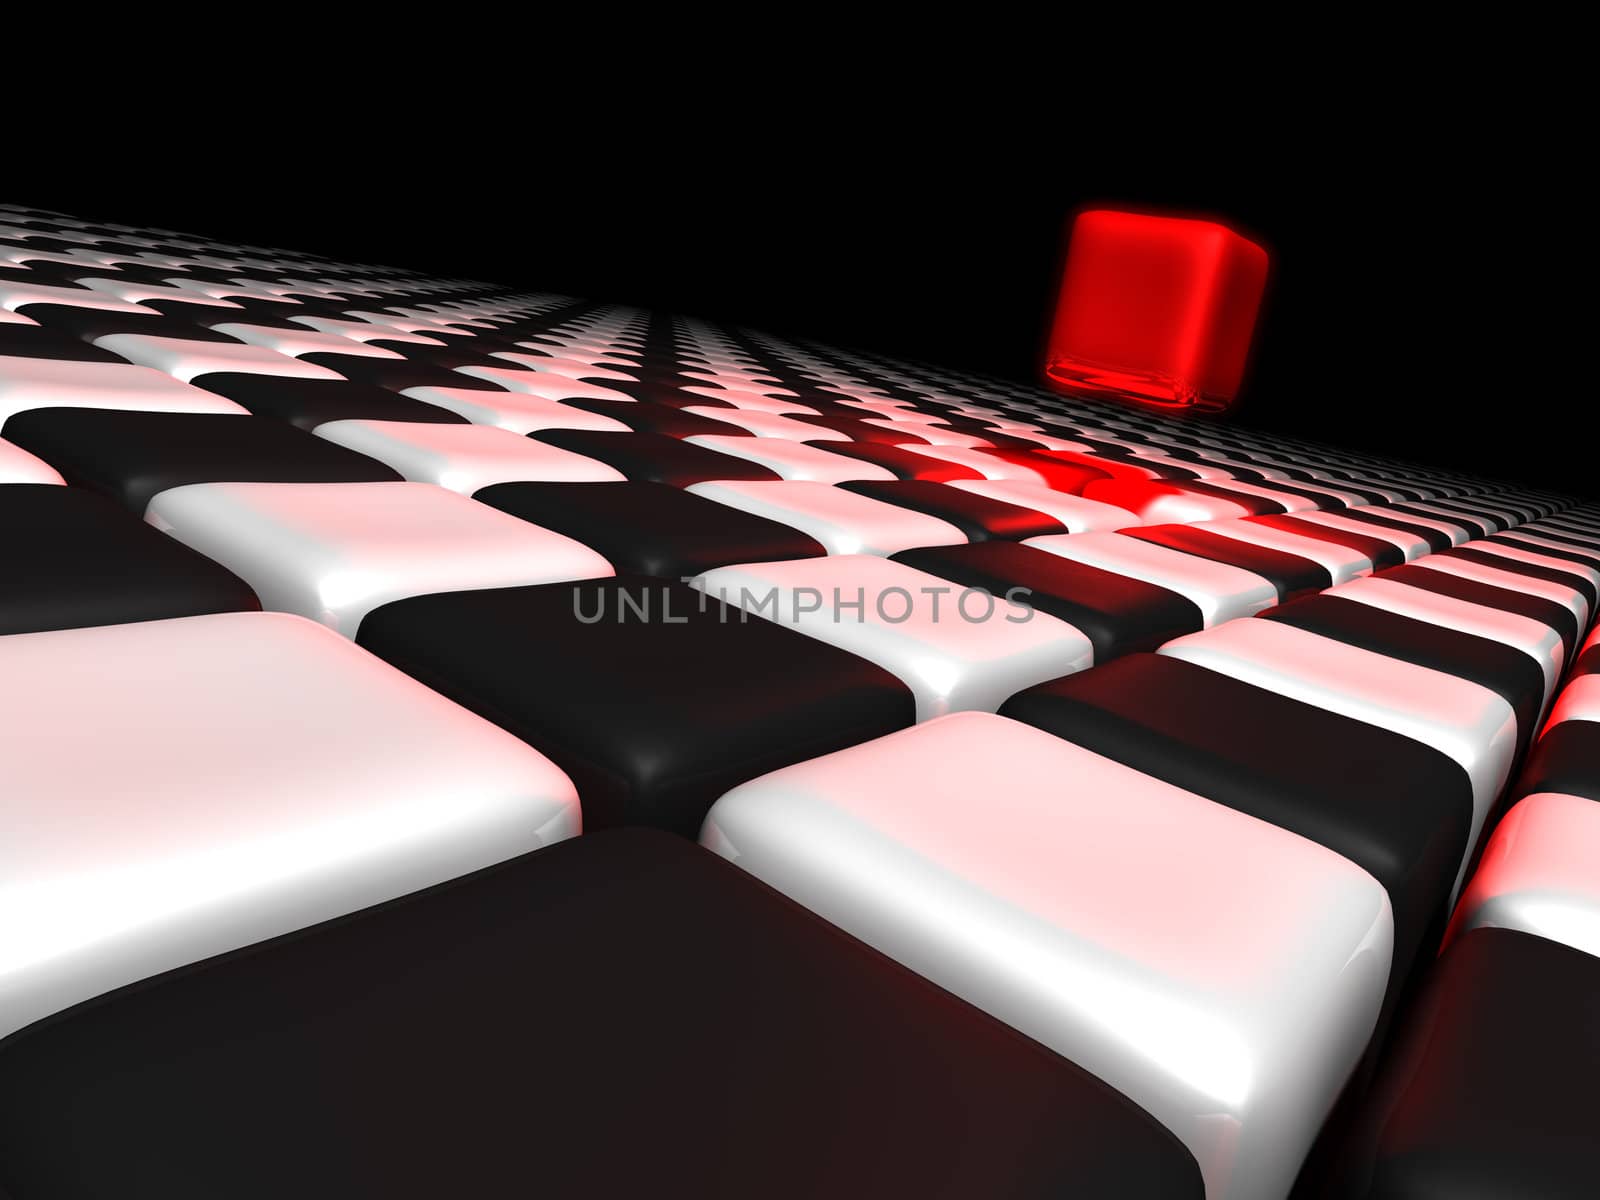 One Red cube alone above many other black and white cubes